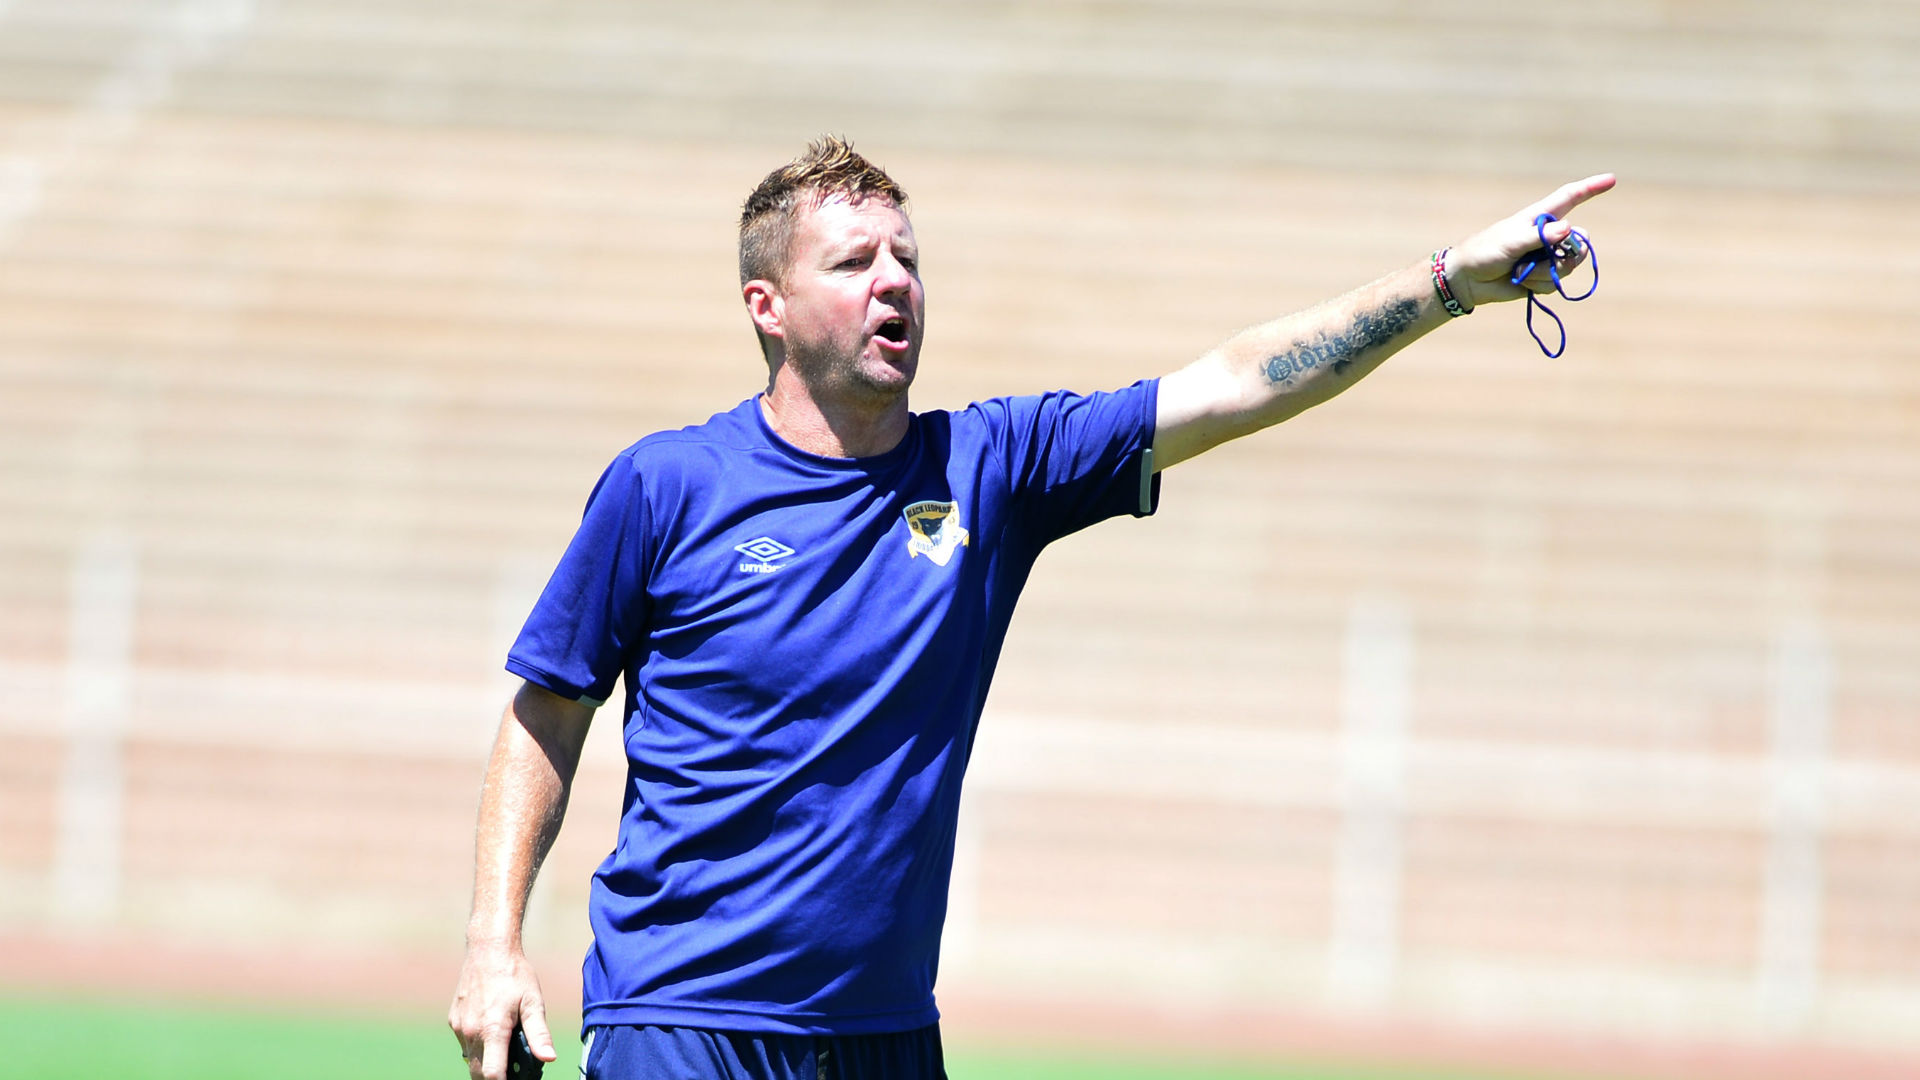 Kerr reveals he wants to stay at Baroka FC despite challenging circumstances